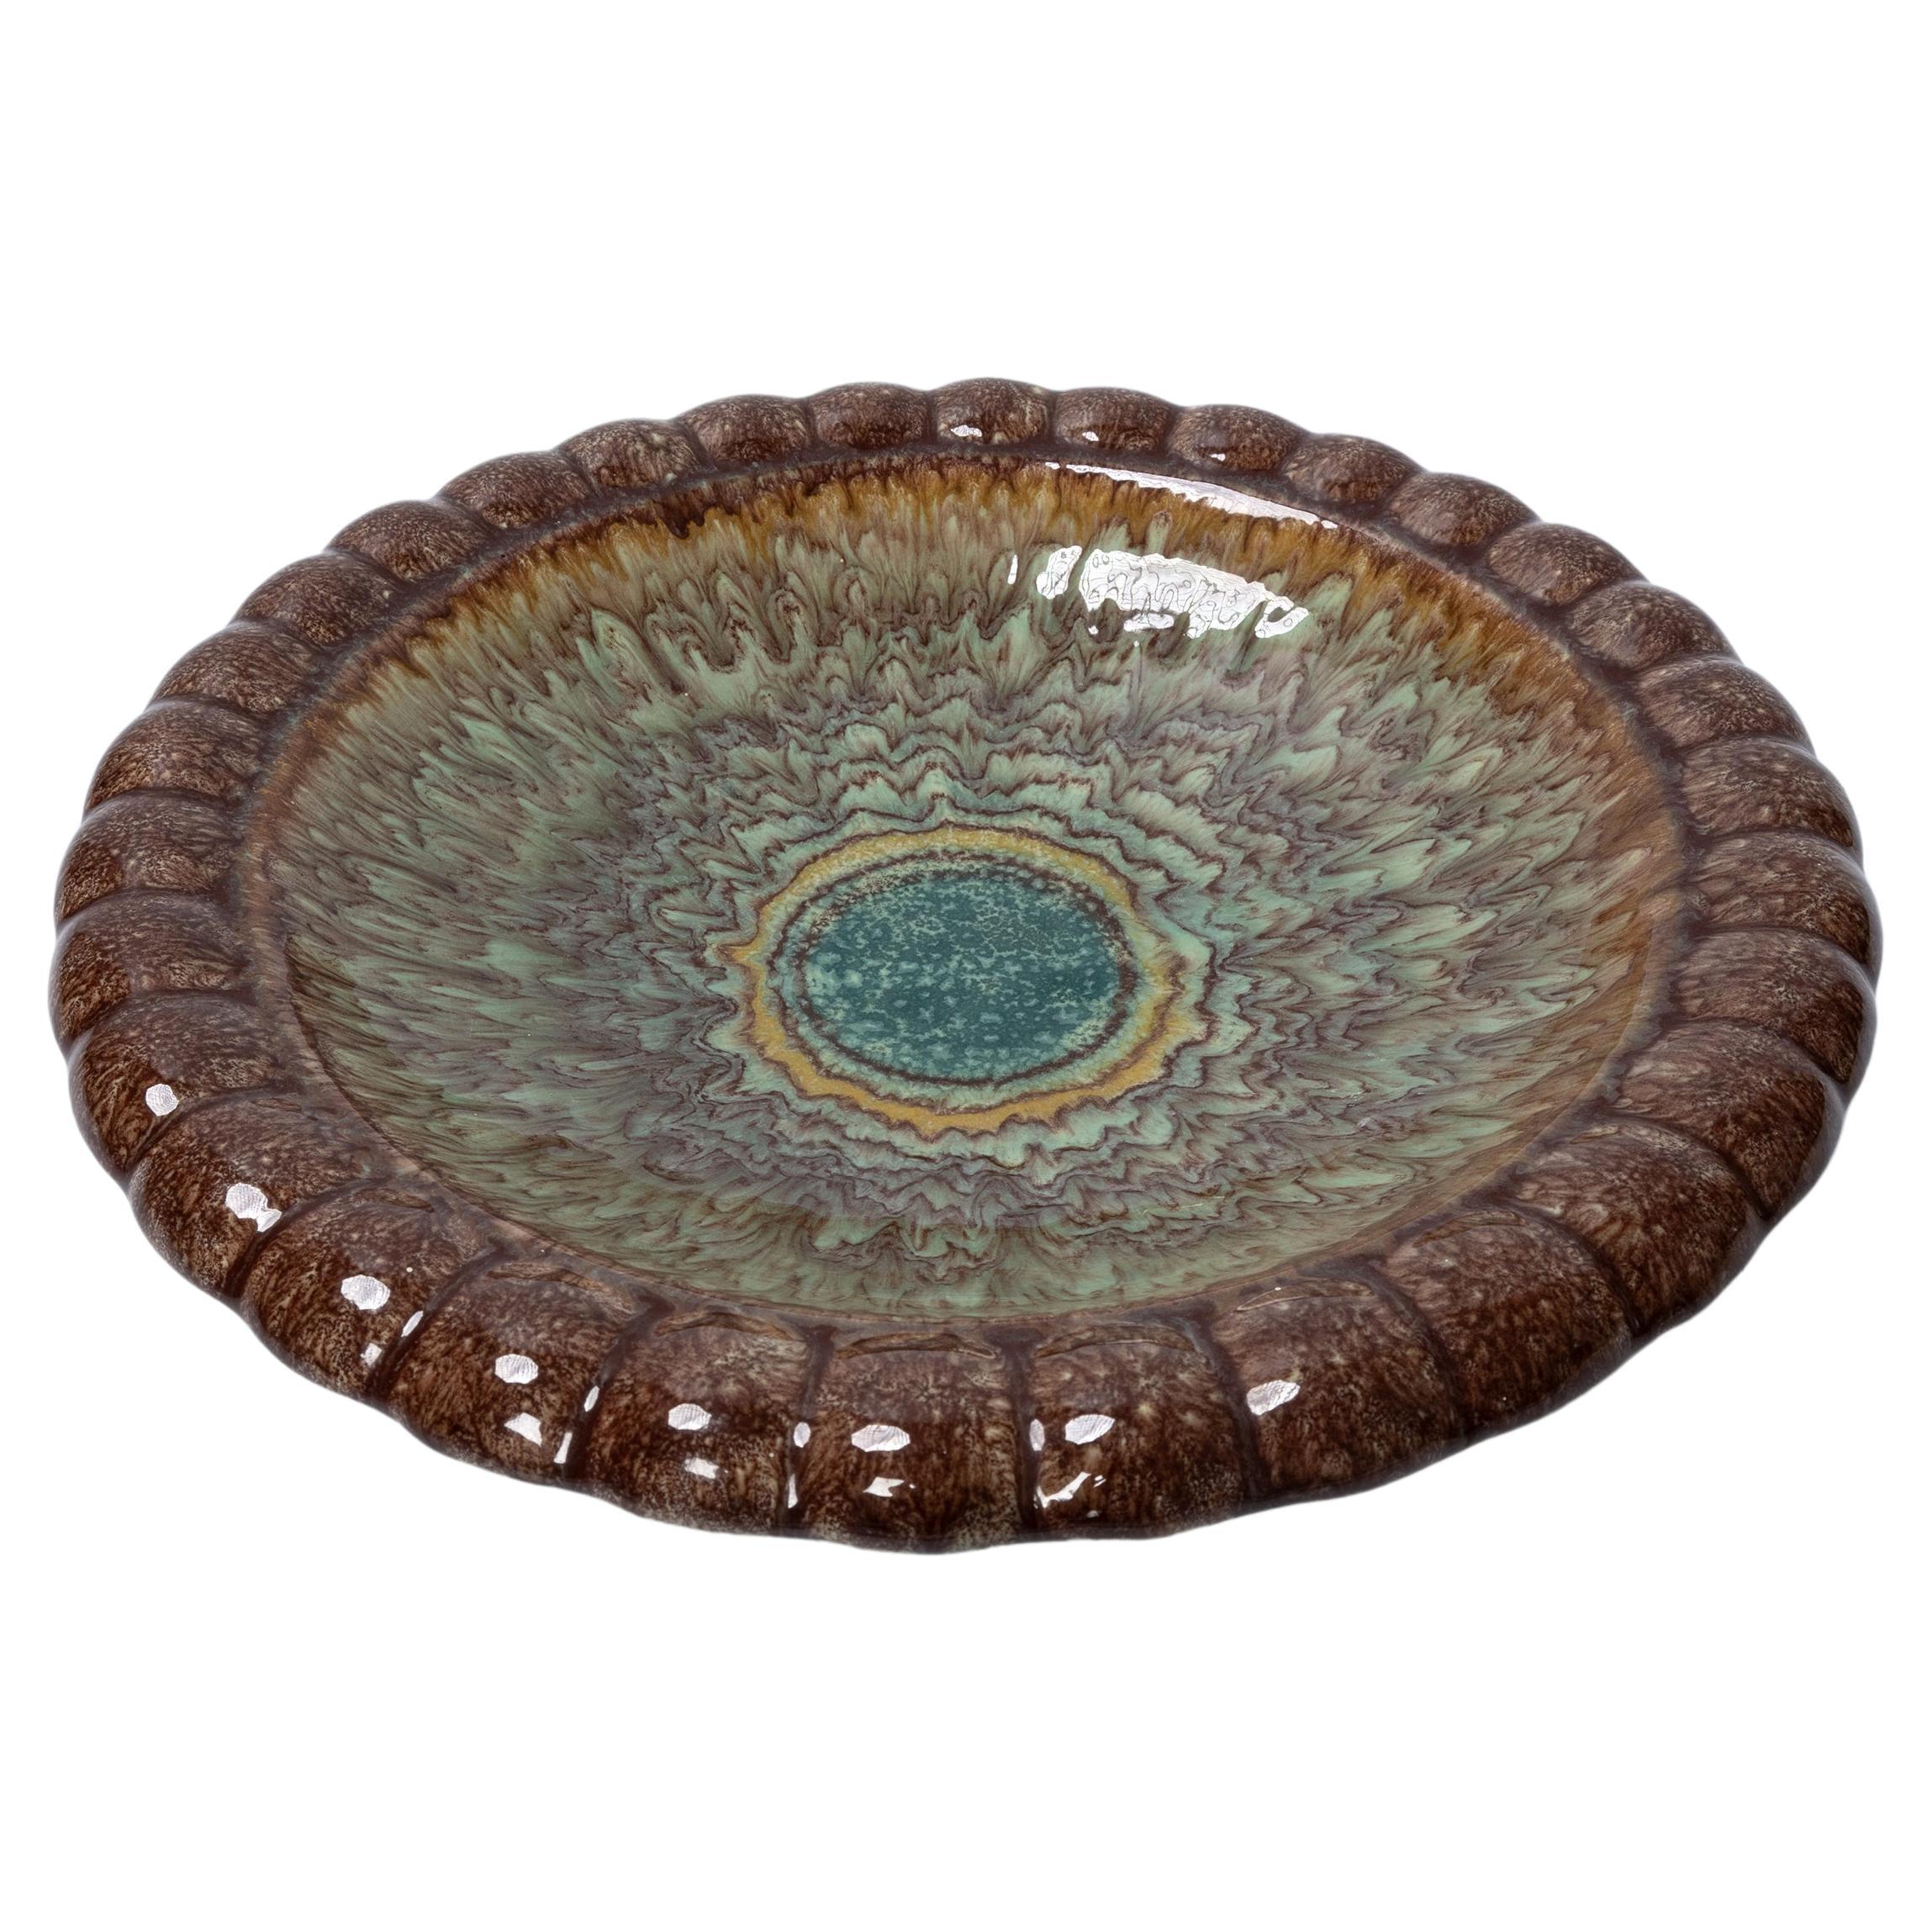 French Mid Century Modern Studio Pottery Footed Bowl Charger 
C.1960
In very good condition commensurate of age.